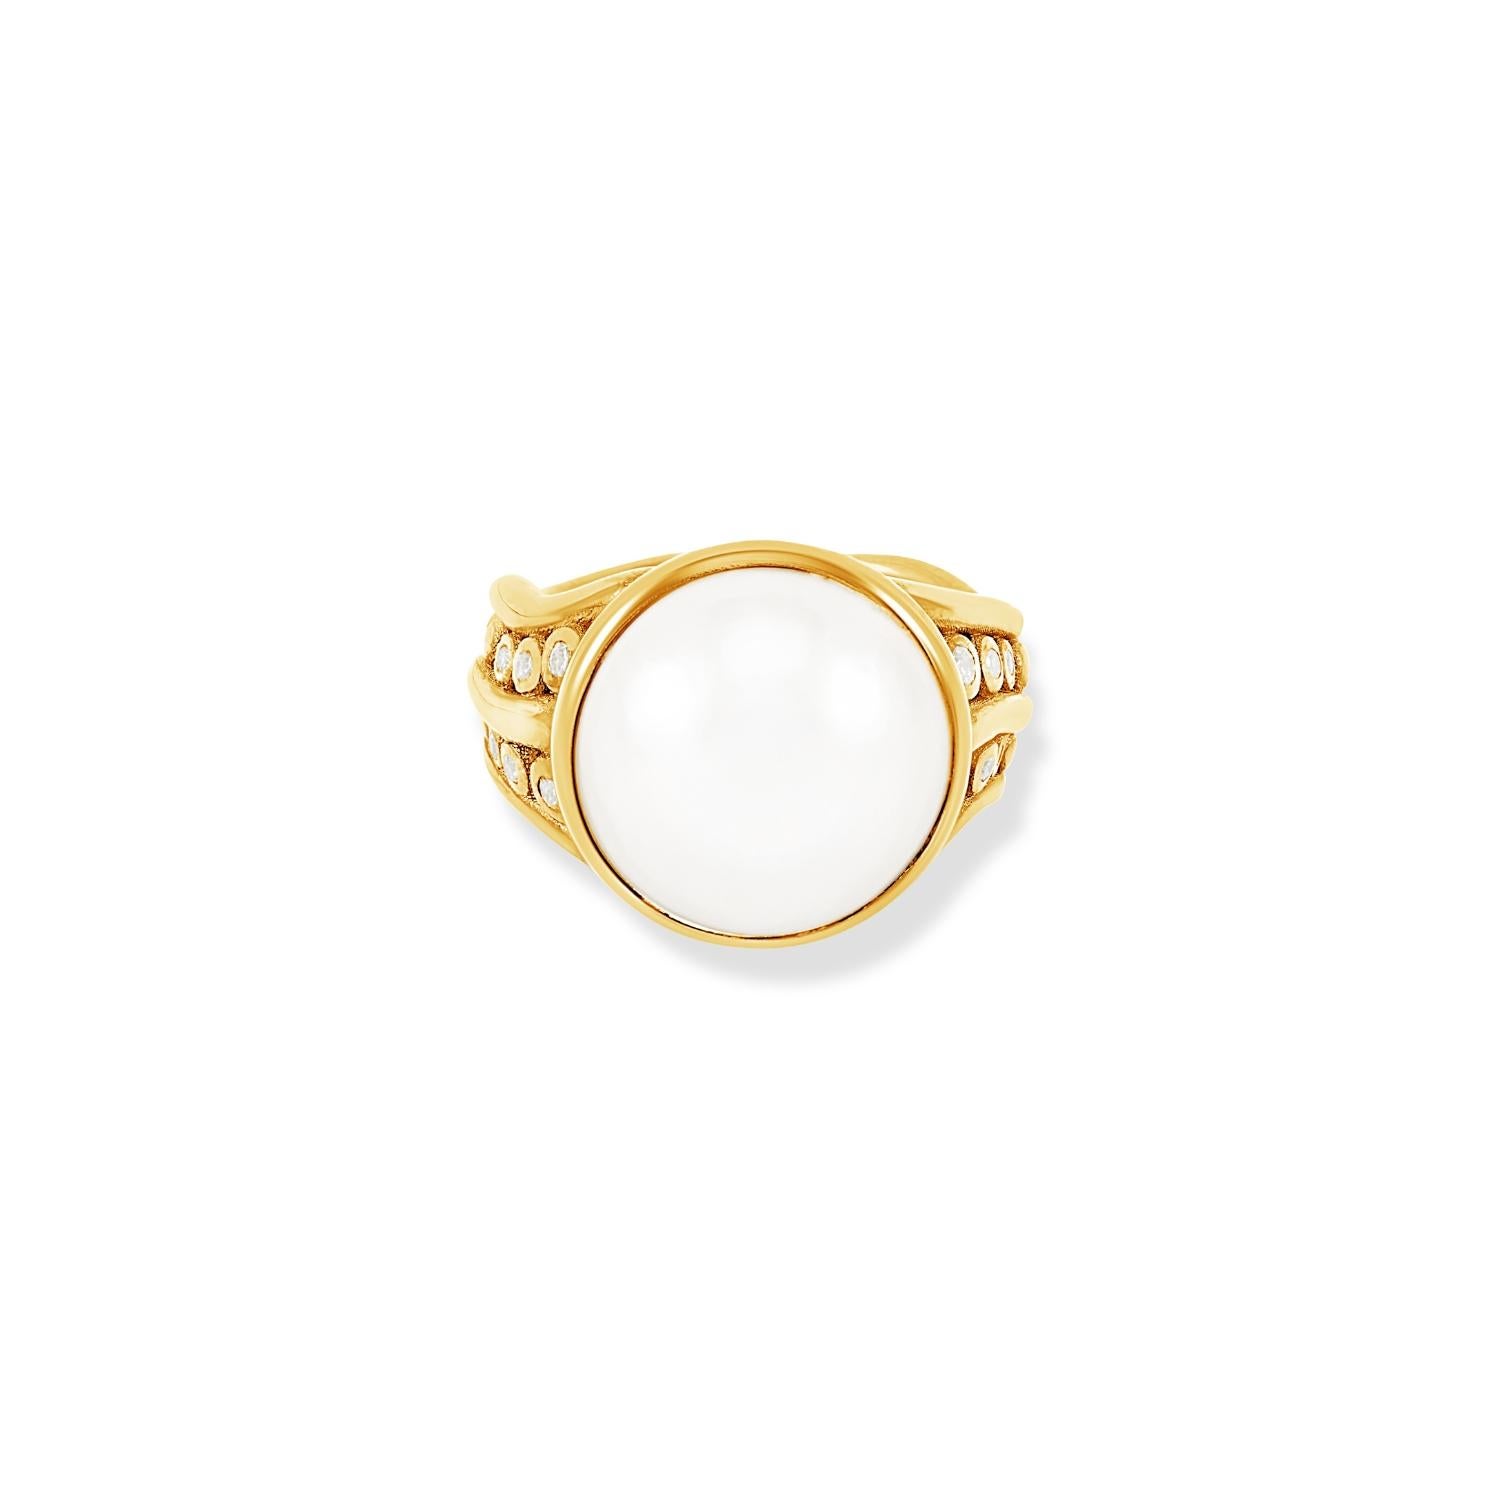 This fascinating Cocktail ring is set with a round White Mabe Pearl in 14k yellow gold and with diamonds set in droplets held between the three rippling bands. Inspired by creatures of the coral reef, the Anemone collection is fascinating in its